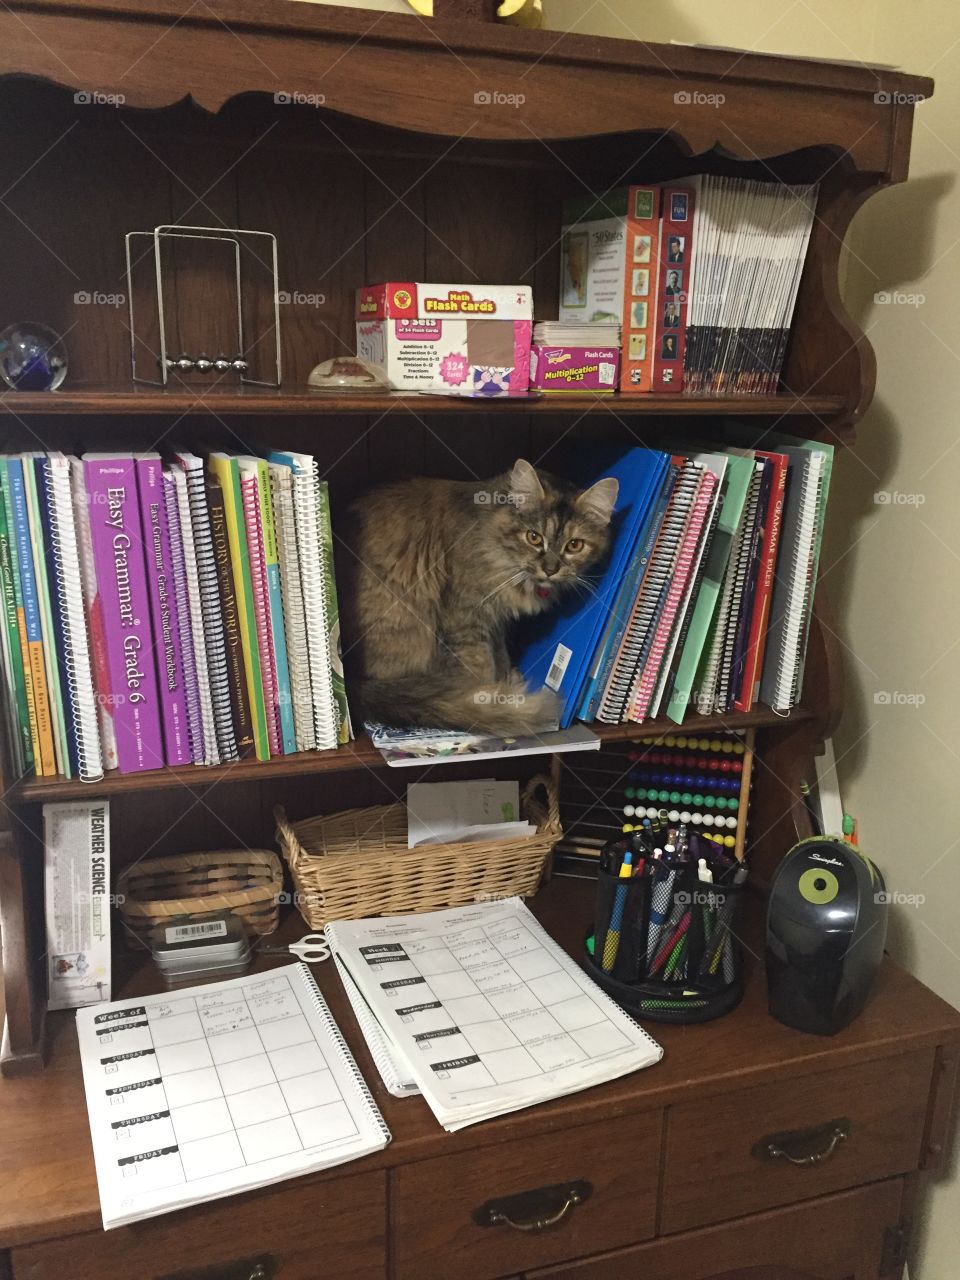 A cute, fluffy kitty sitting on the book shelf of the desk.